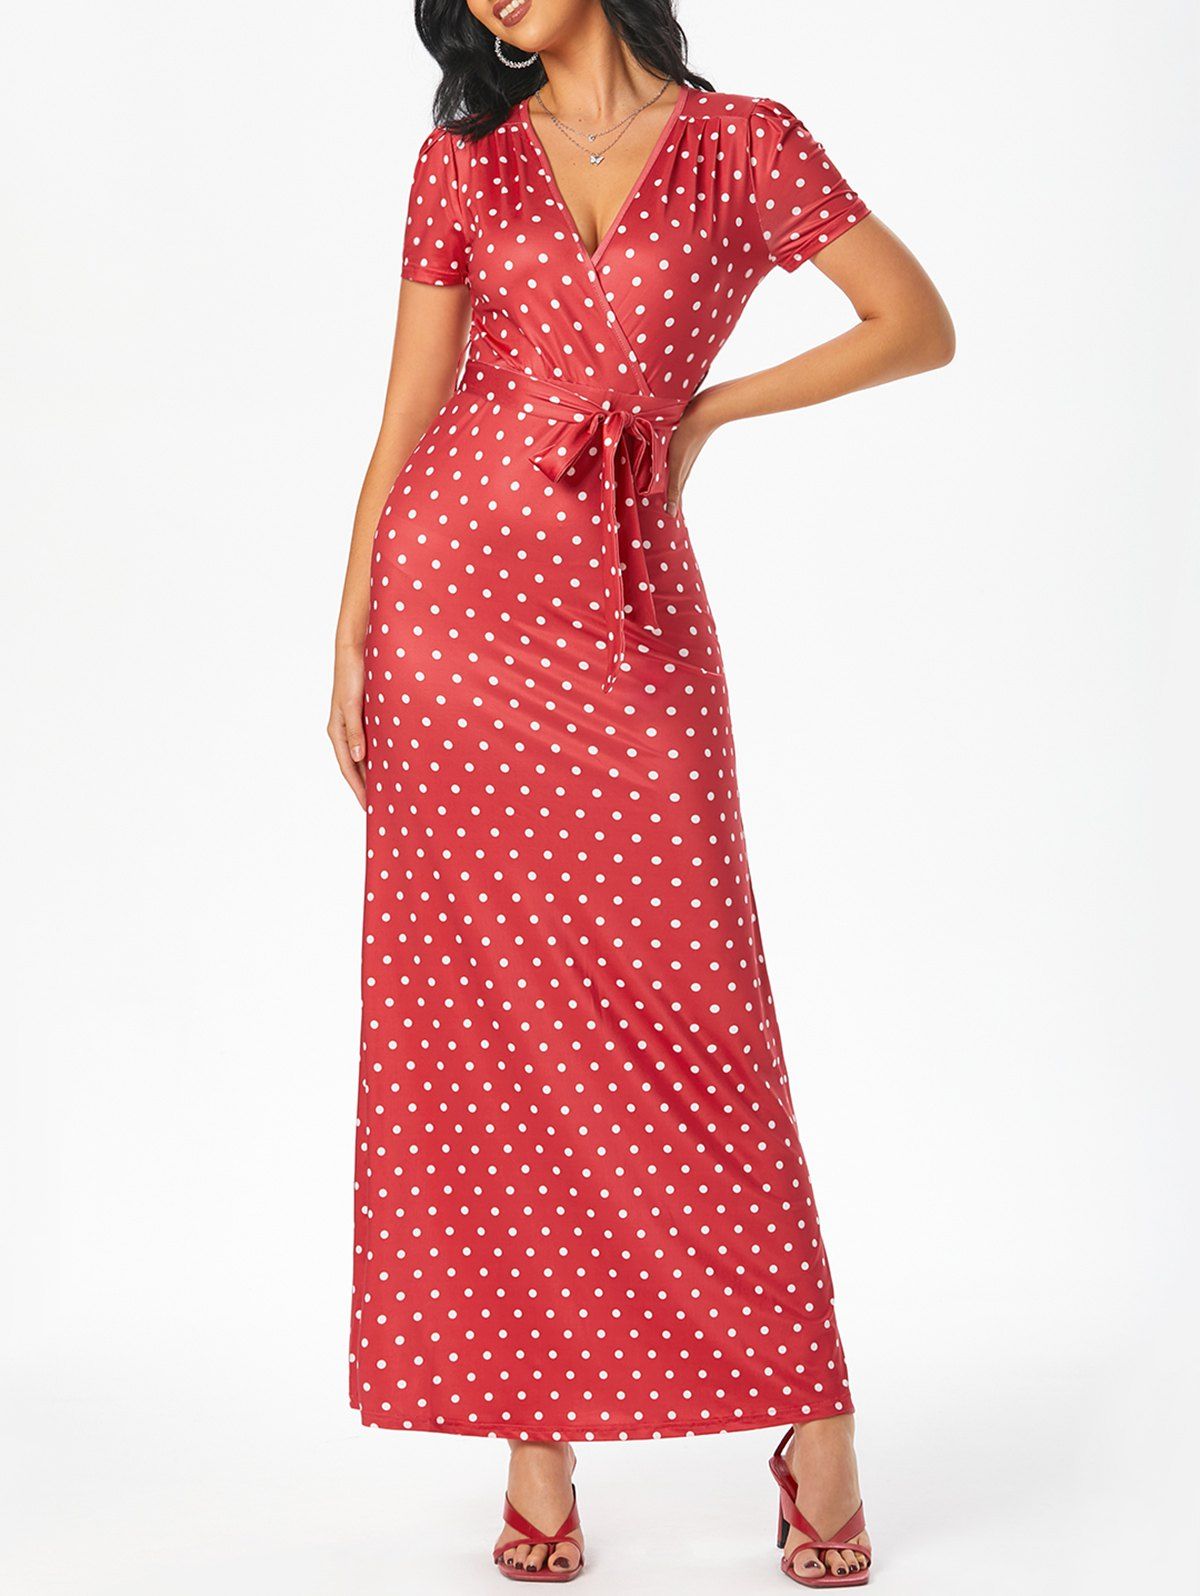 Polka Dot Belted Maxi Surplice Dress - RED 2XL